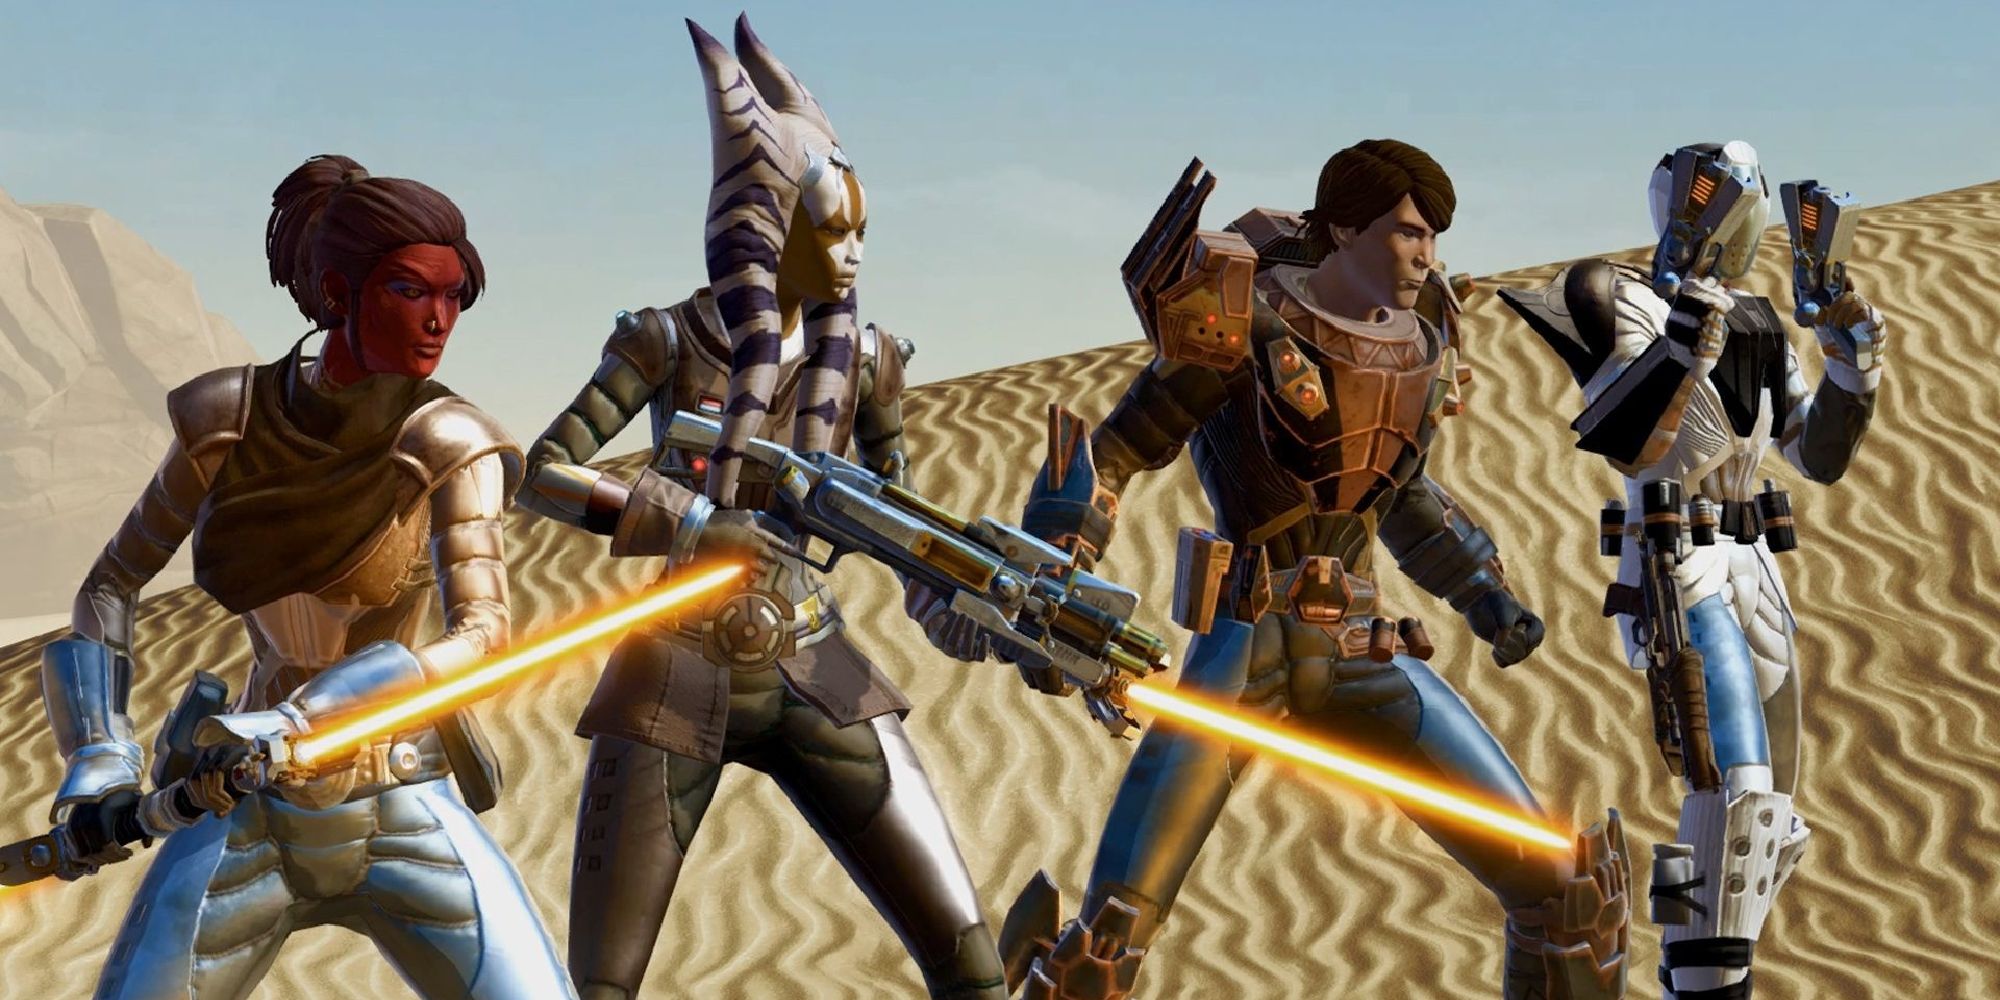 Characters from Star Wars: The Old Republic